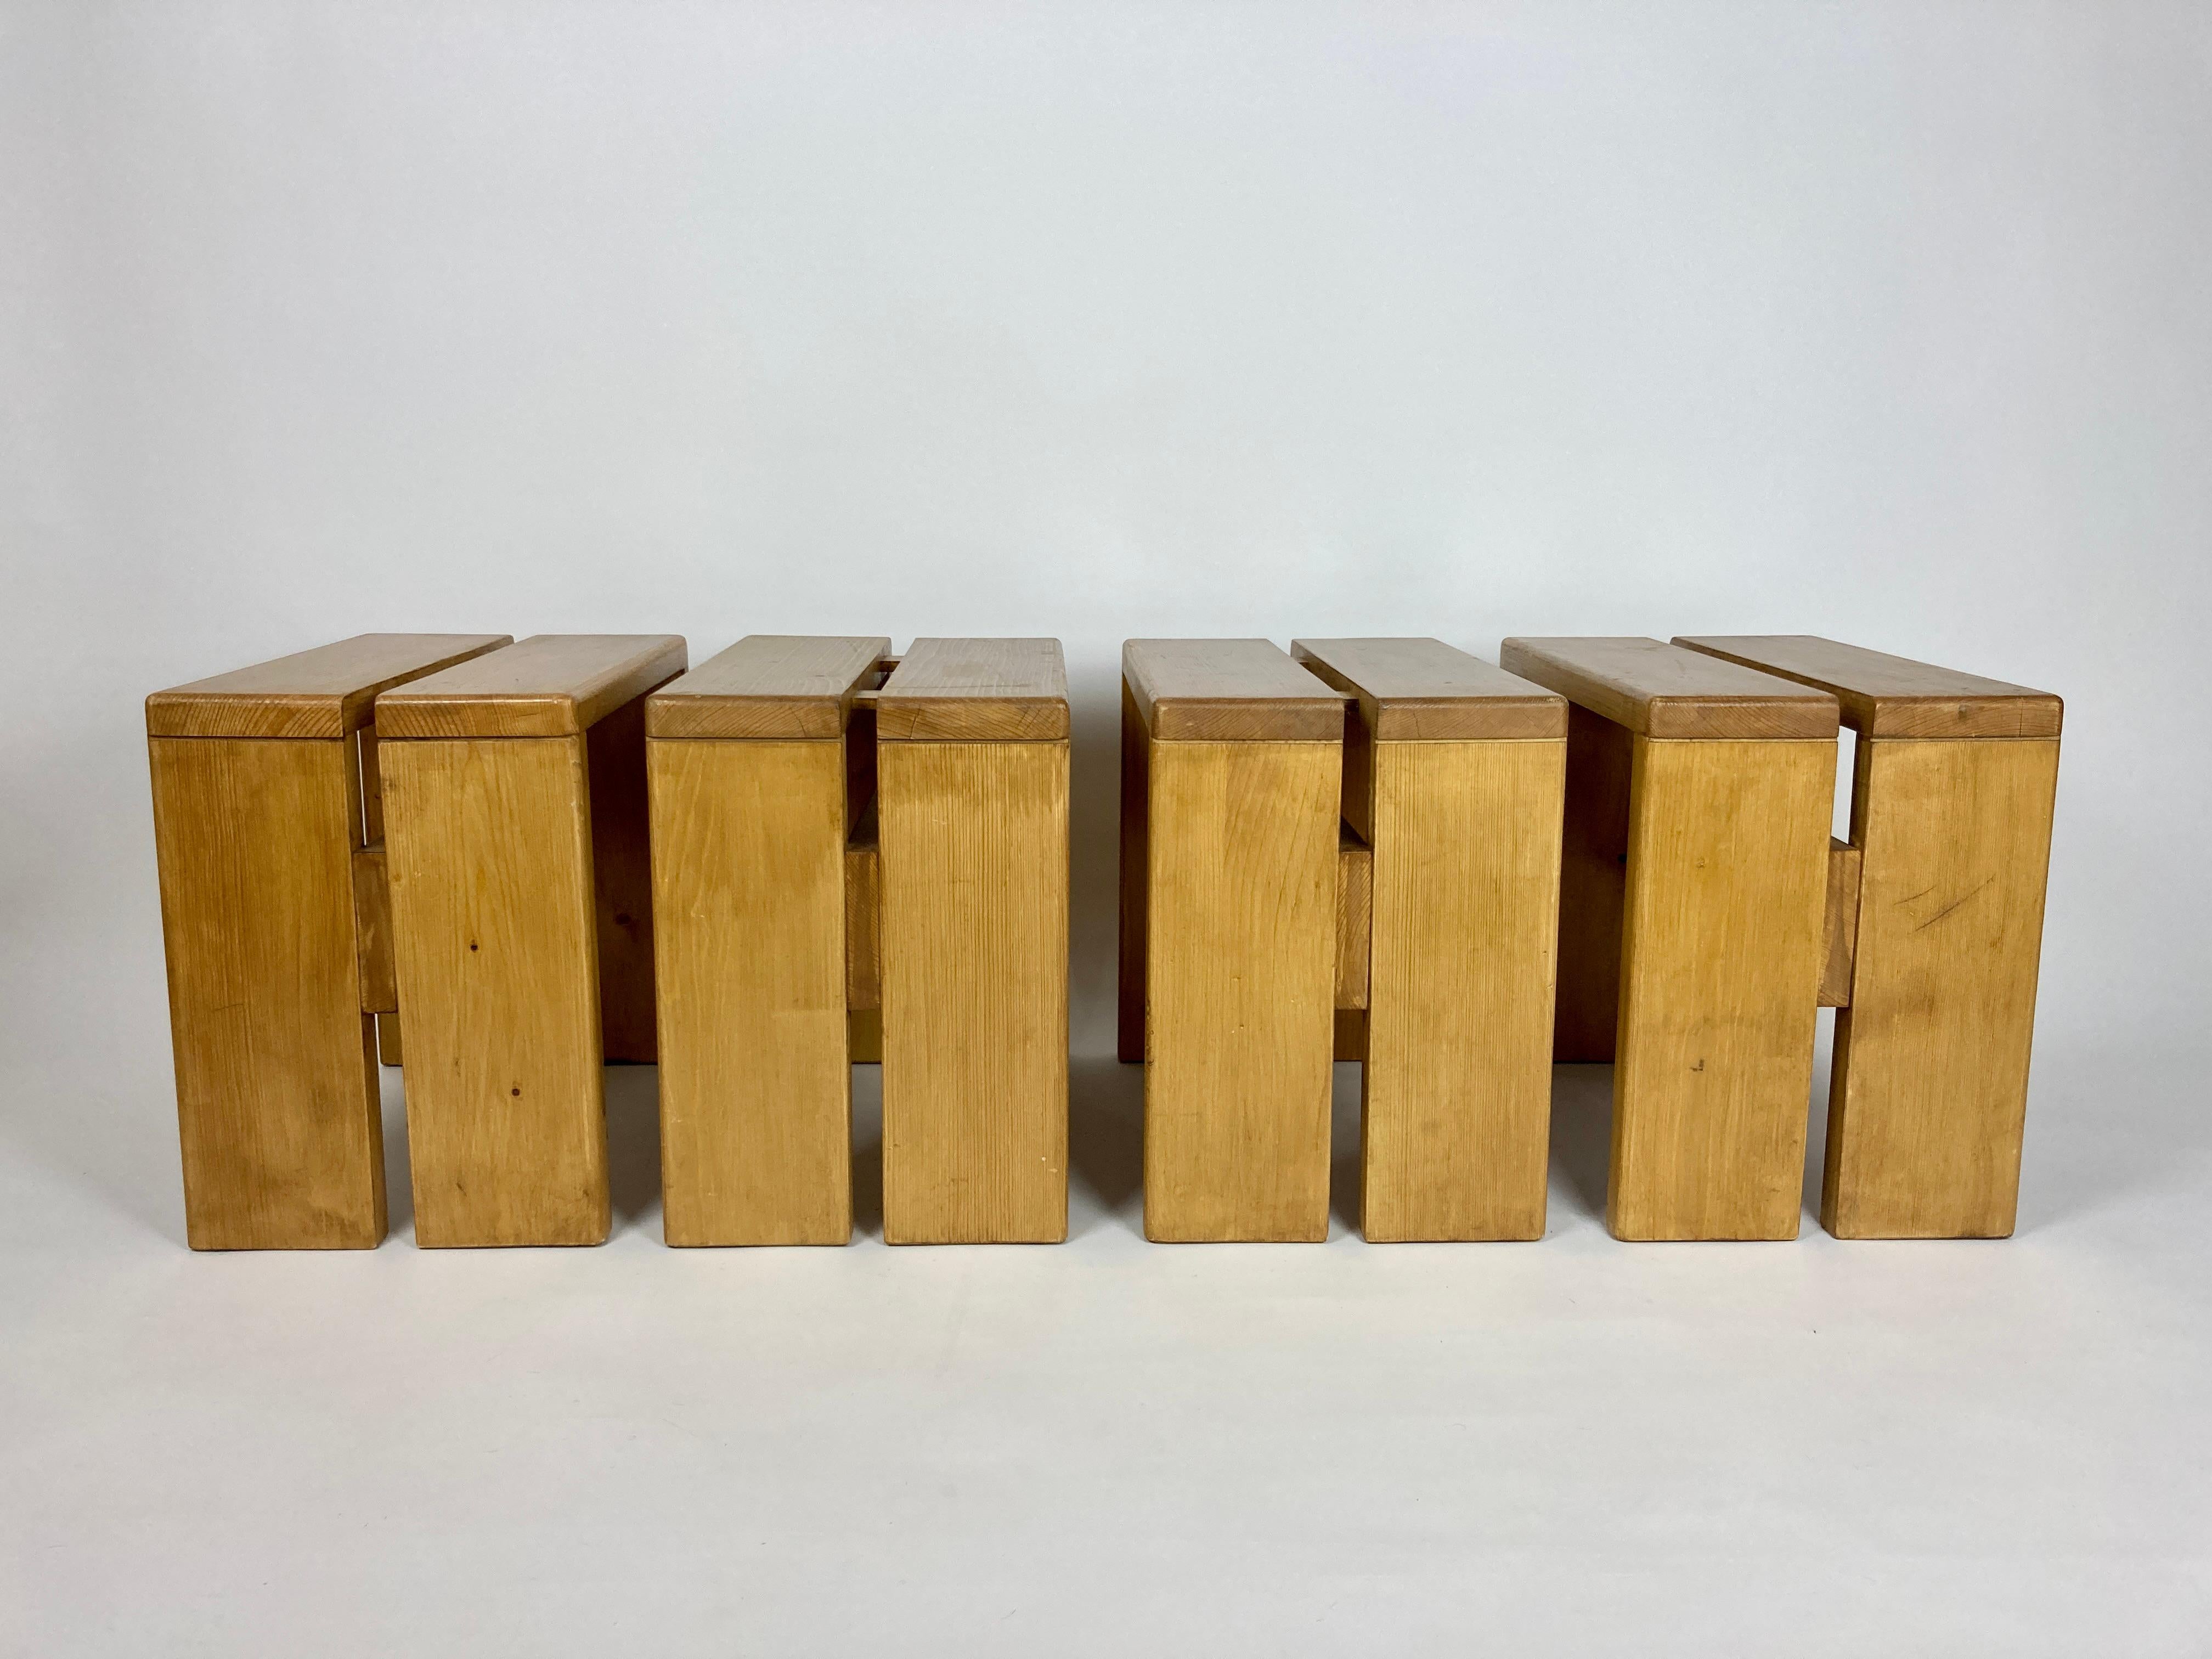 20th Century Set of 4 Stools/Side Tables from Les Arcs, France 1970s, Charlotte Perriand